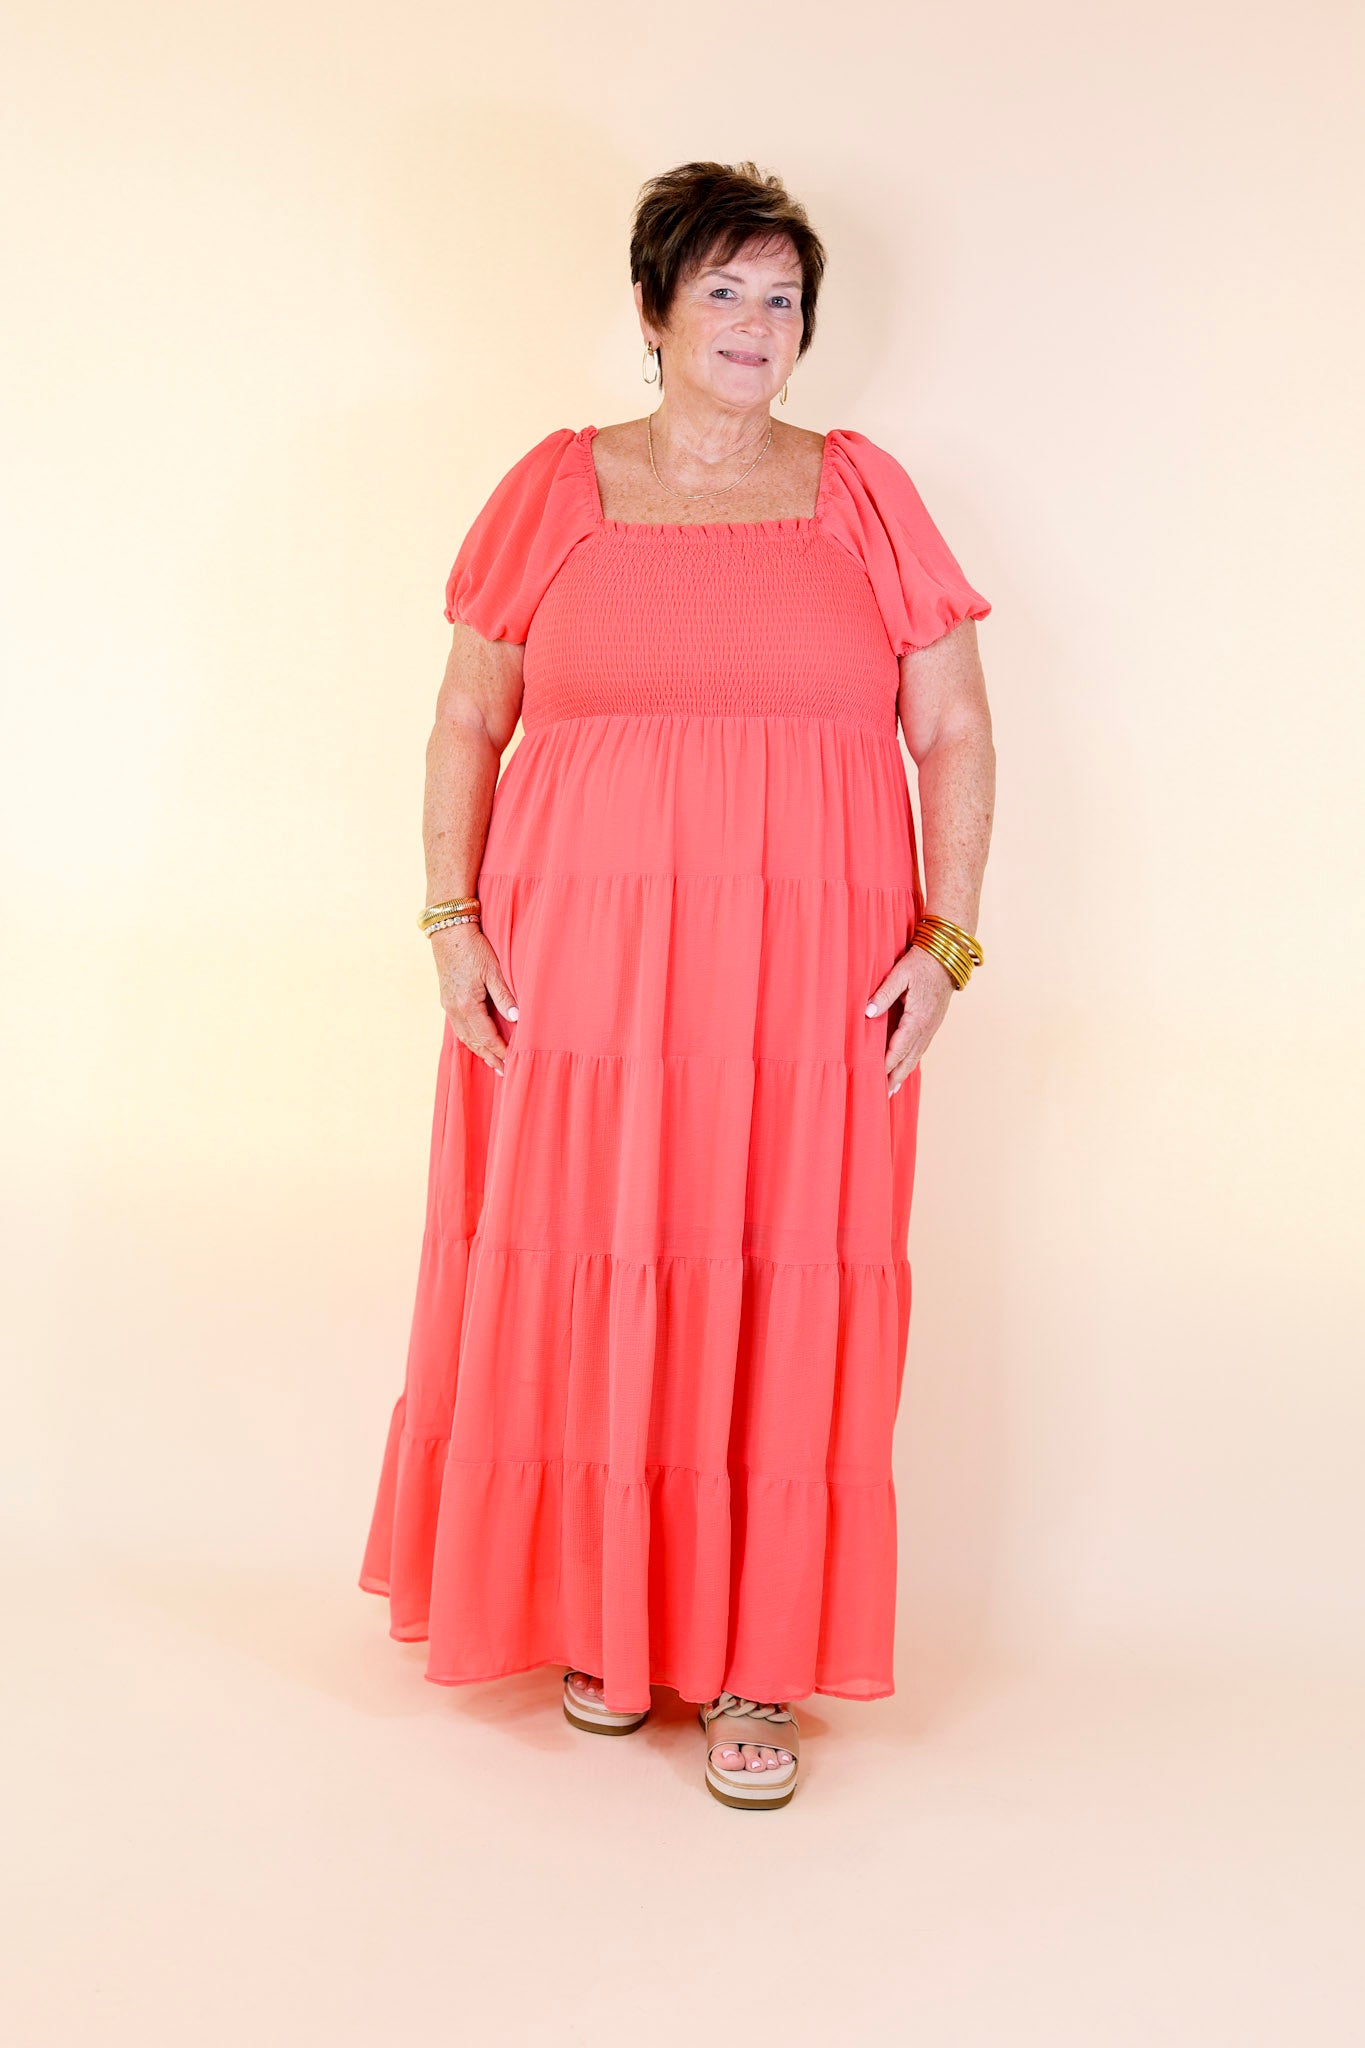 Honeysuckle Love Tiered Maxi Dress with Smocked Bodice in Coral Red